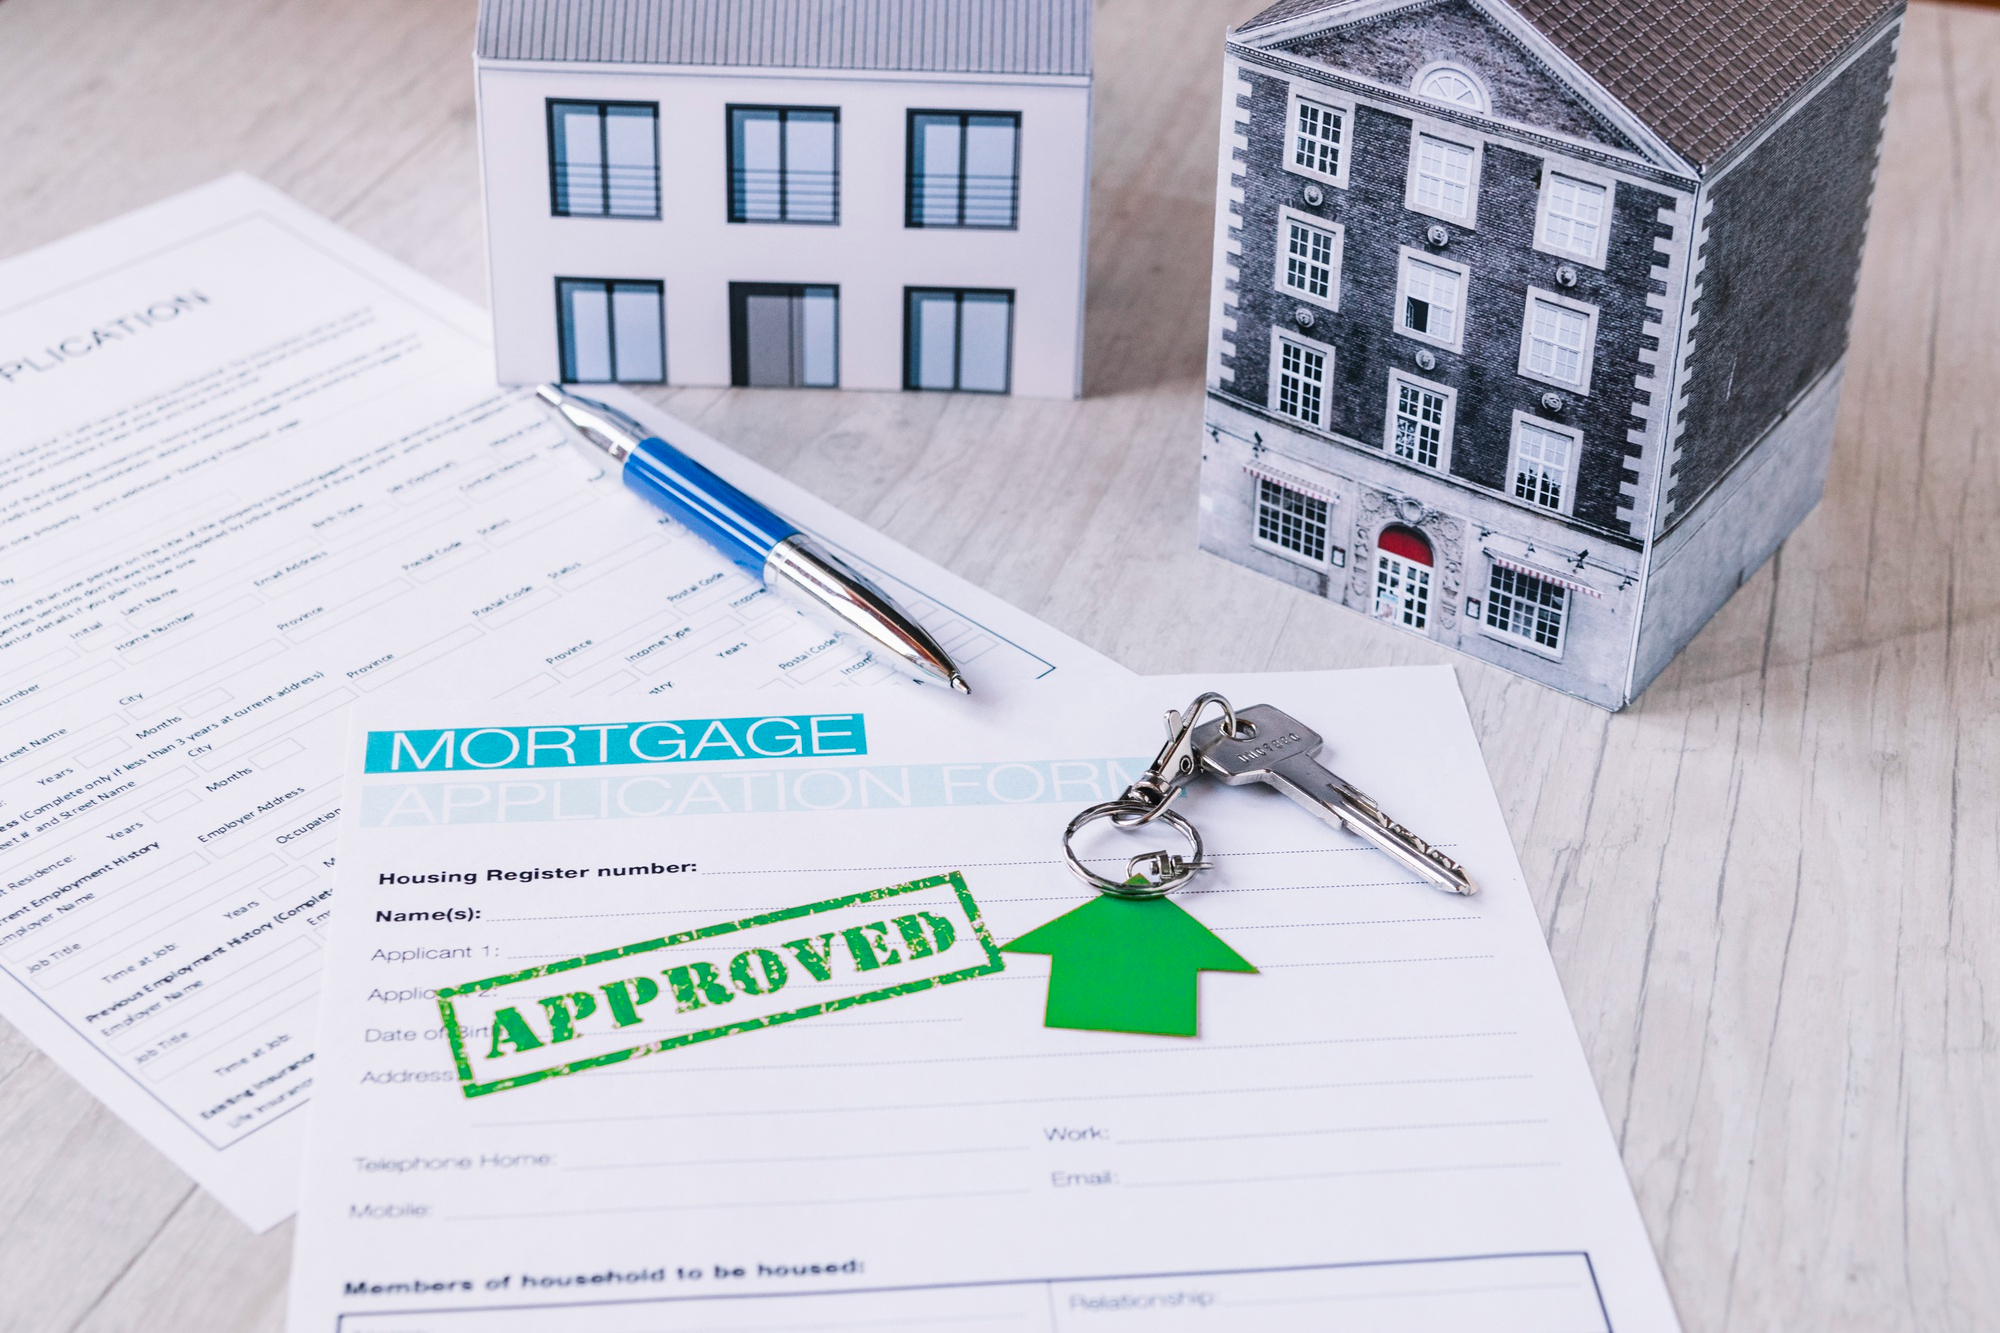 Mortgage Approval Made Easy